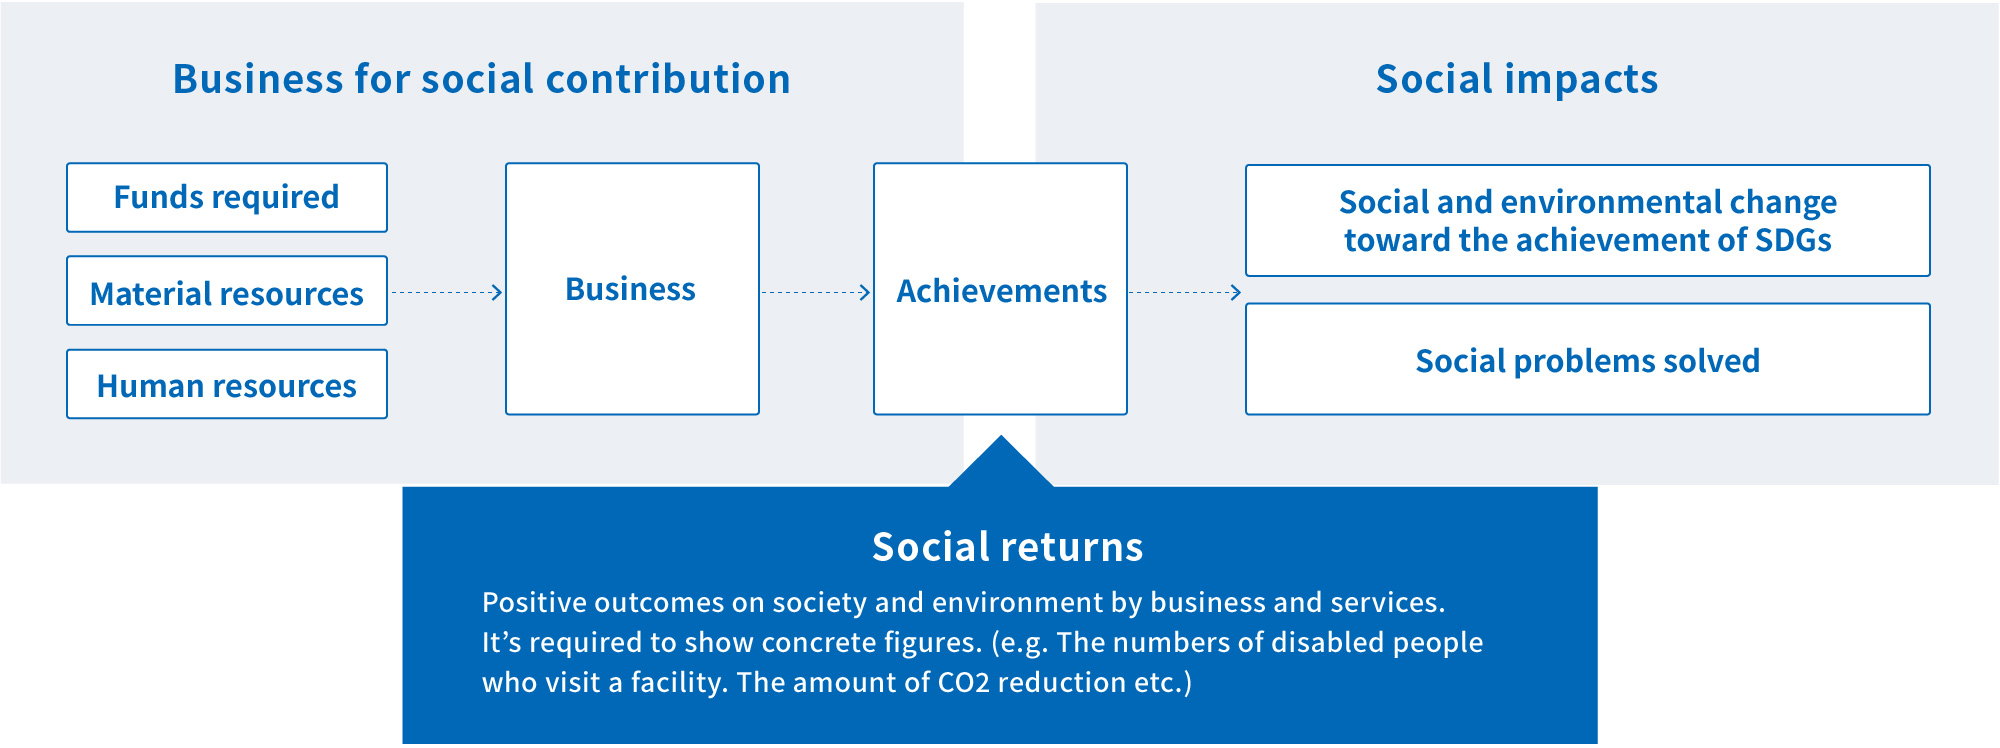 Our thought on social returns and social impacts